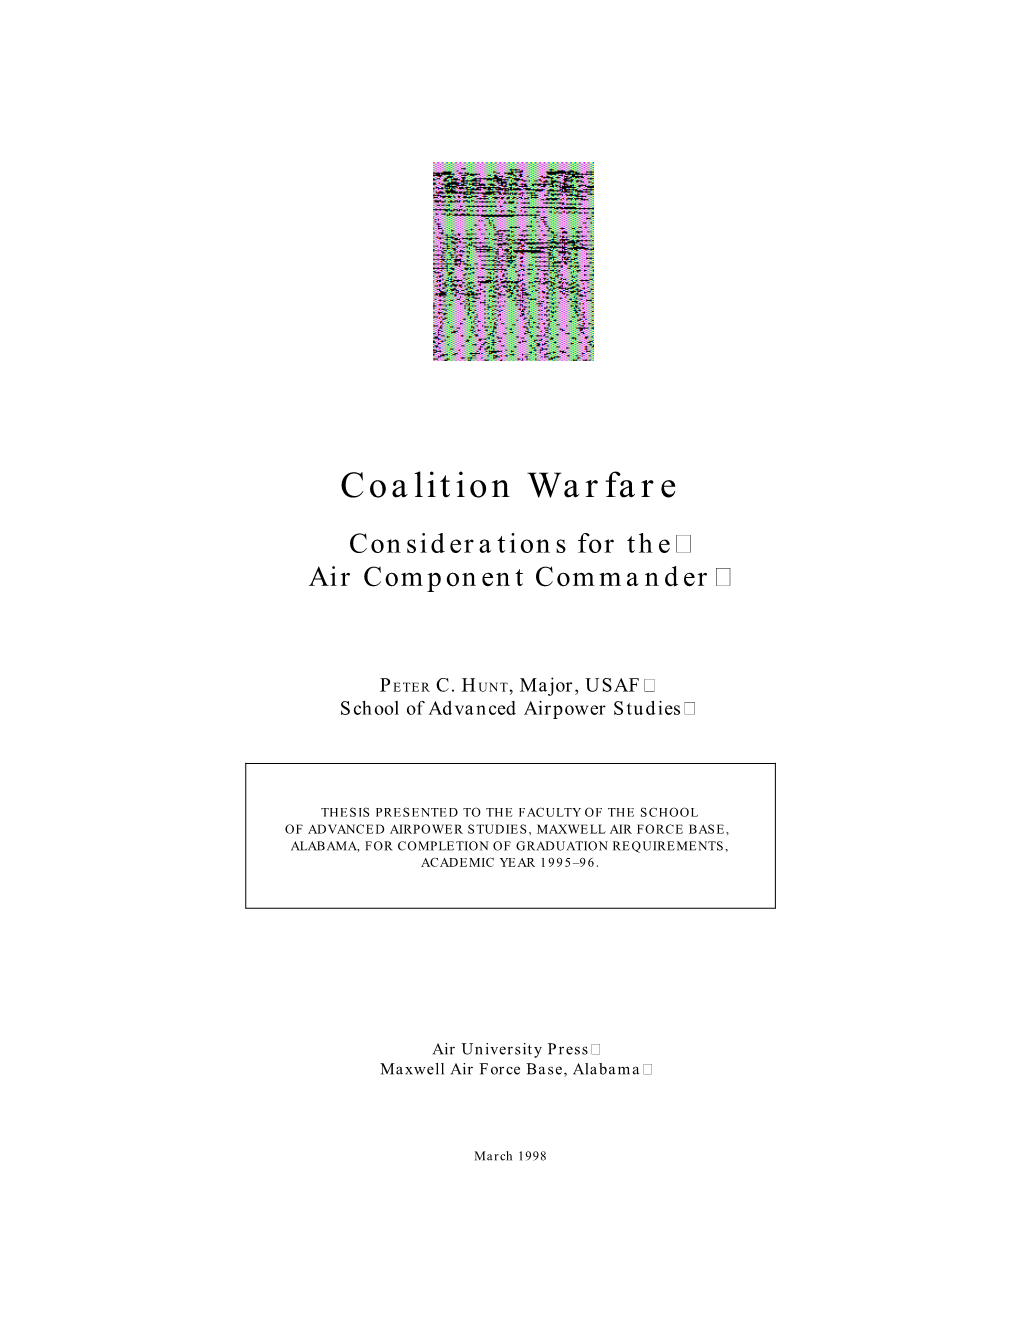 Coalition Warfare Considerations for the Air Component Commander